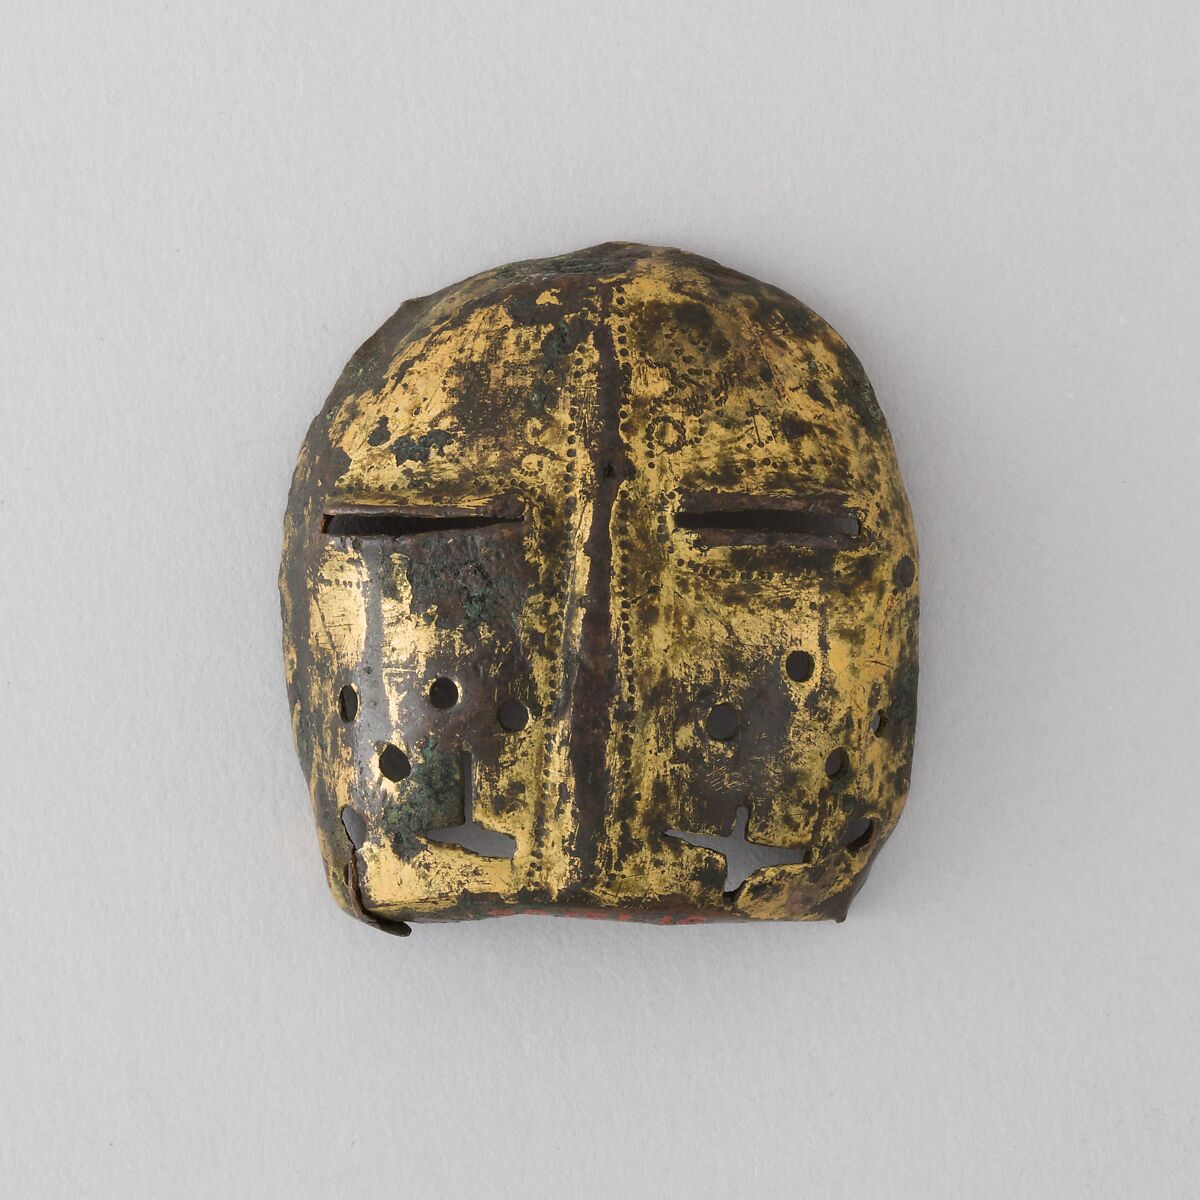 Visor of a Miniature Helm, Copper, gold, French 